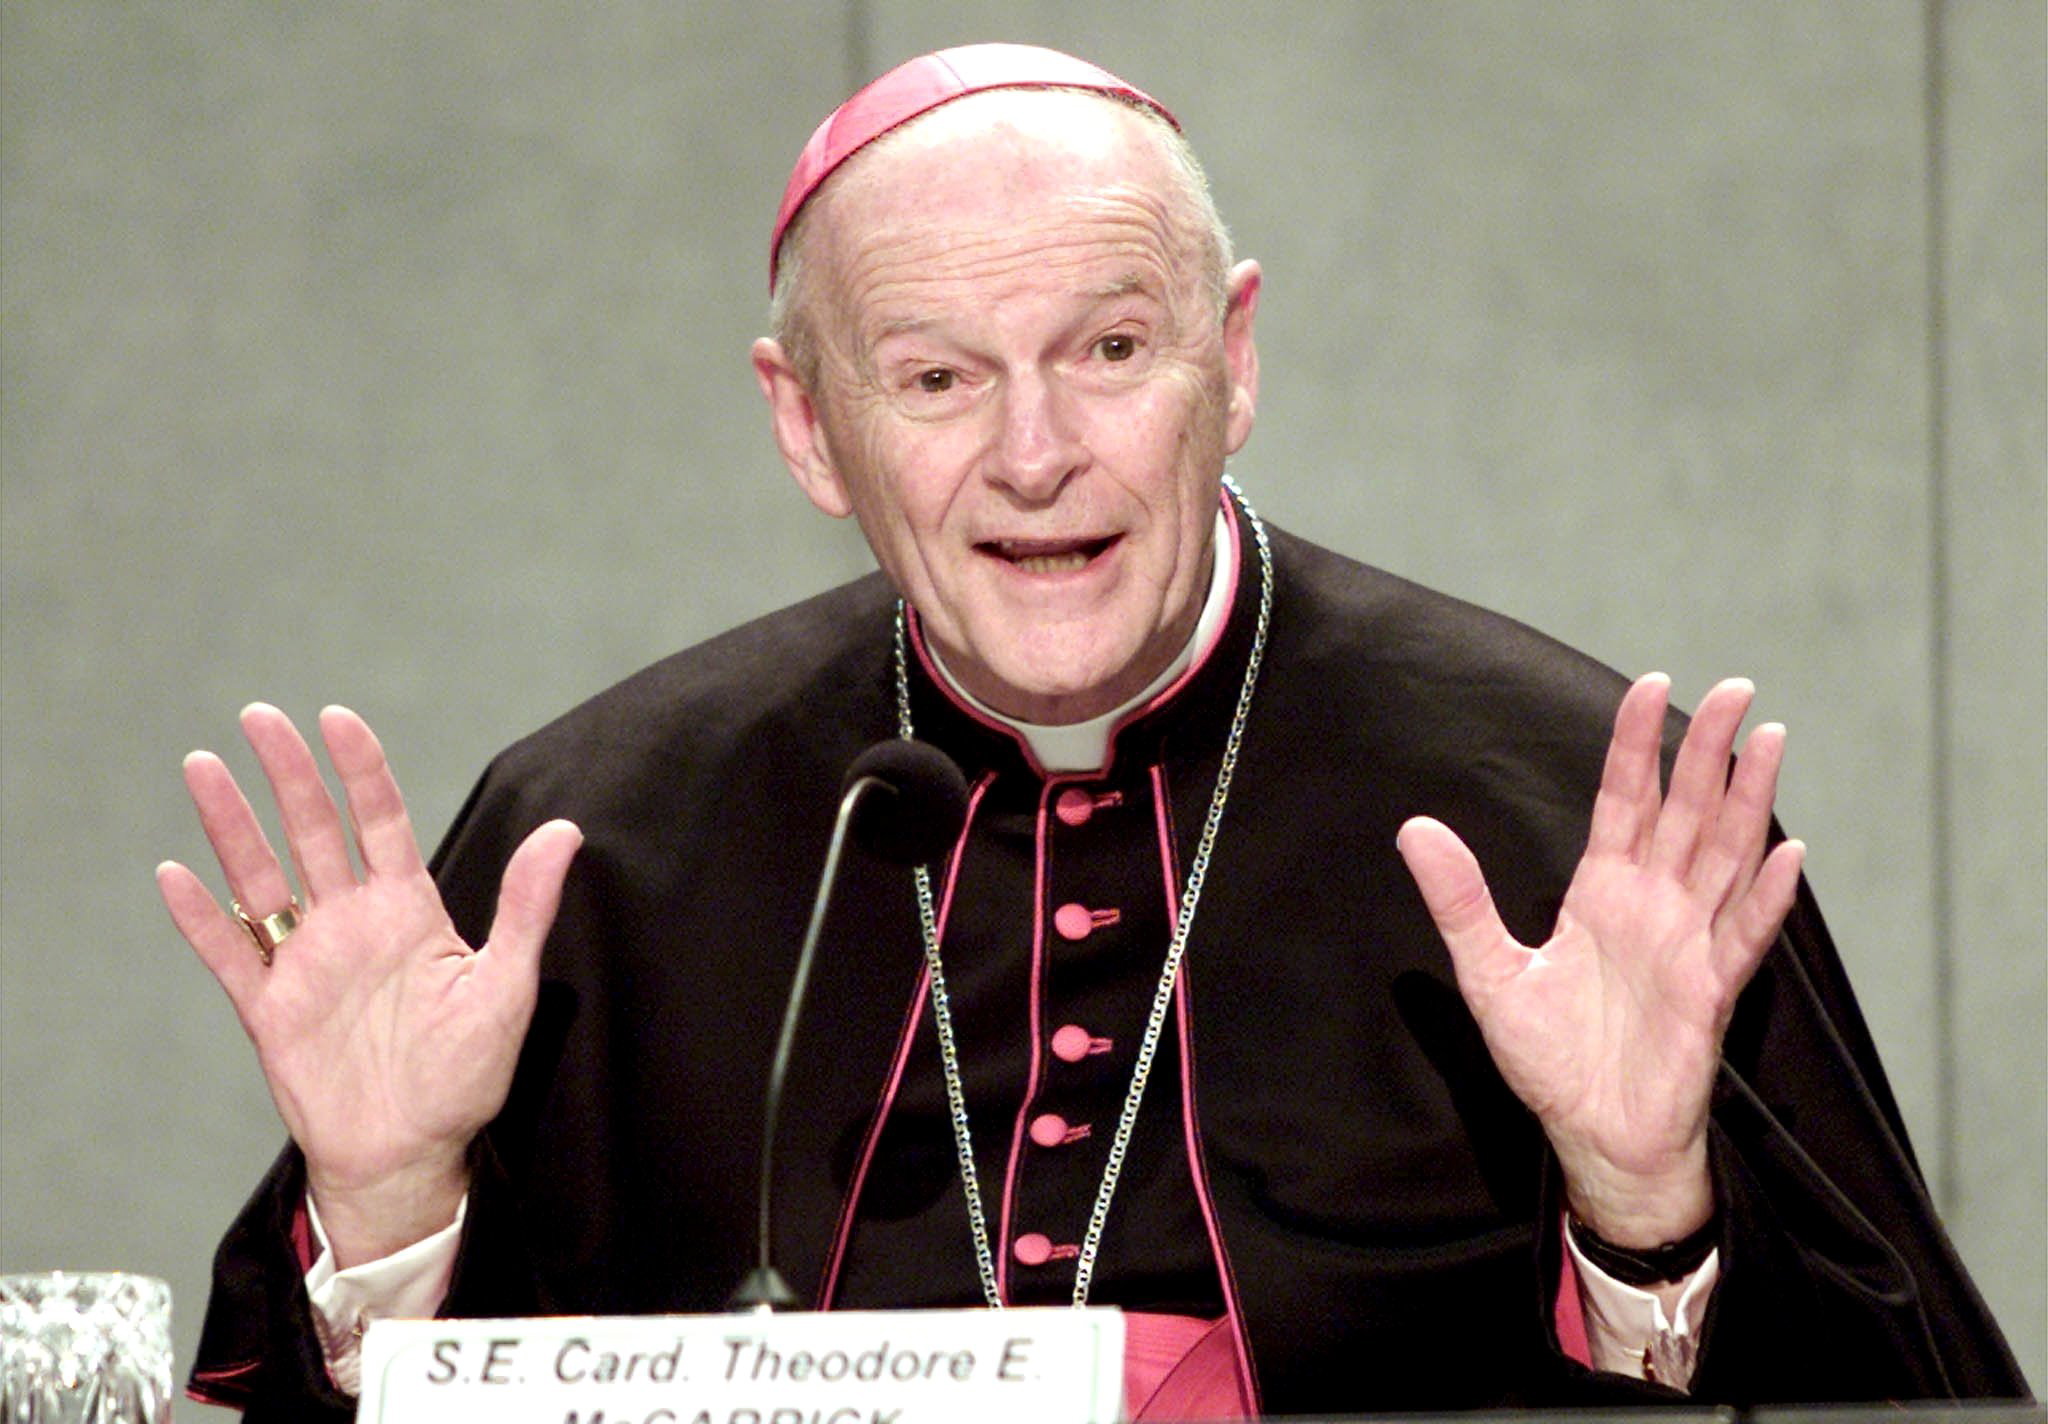 epa06915550 (FILE) - US Cardinal Theodore McCarrick of the Archdiocese of Washington speaks during a news conference at the Vatican press center, Vatican City, 24 April 2002 (reissued 28 July 2018). According to reports, Pope Francis on 28 July 2018 accepted Theodore McCarrick's from College of Cardinals over his sex scandal. McCarrick was accused of sexually abusing a teenager nearly five decades ago during his time as a priest in the Archdiocese of New York.  EPA/DANILO SCHIAVELLA *** Local Caption *** 99363528